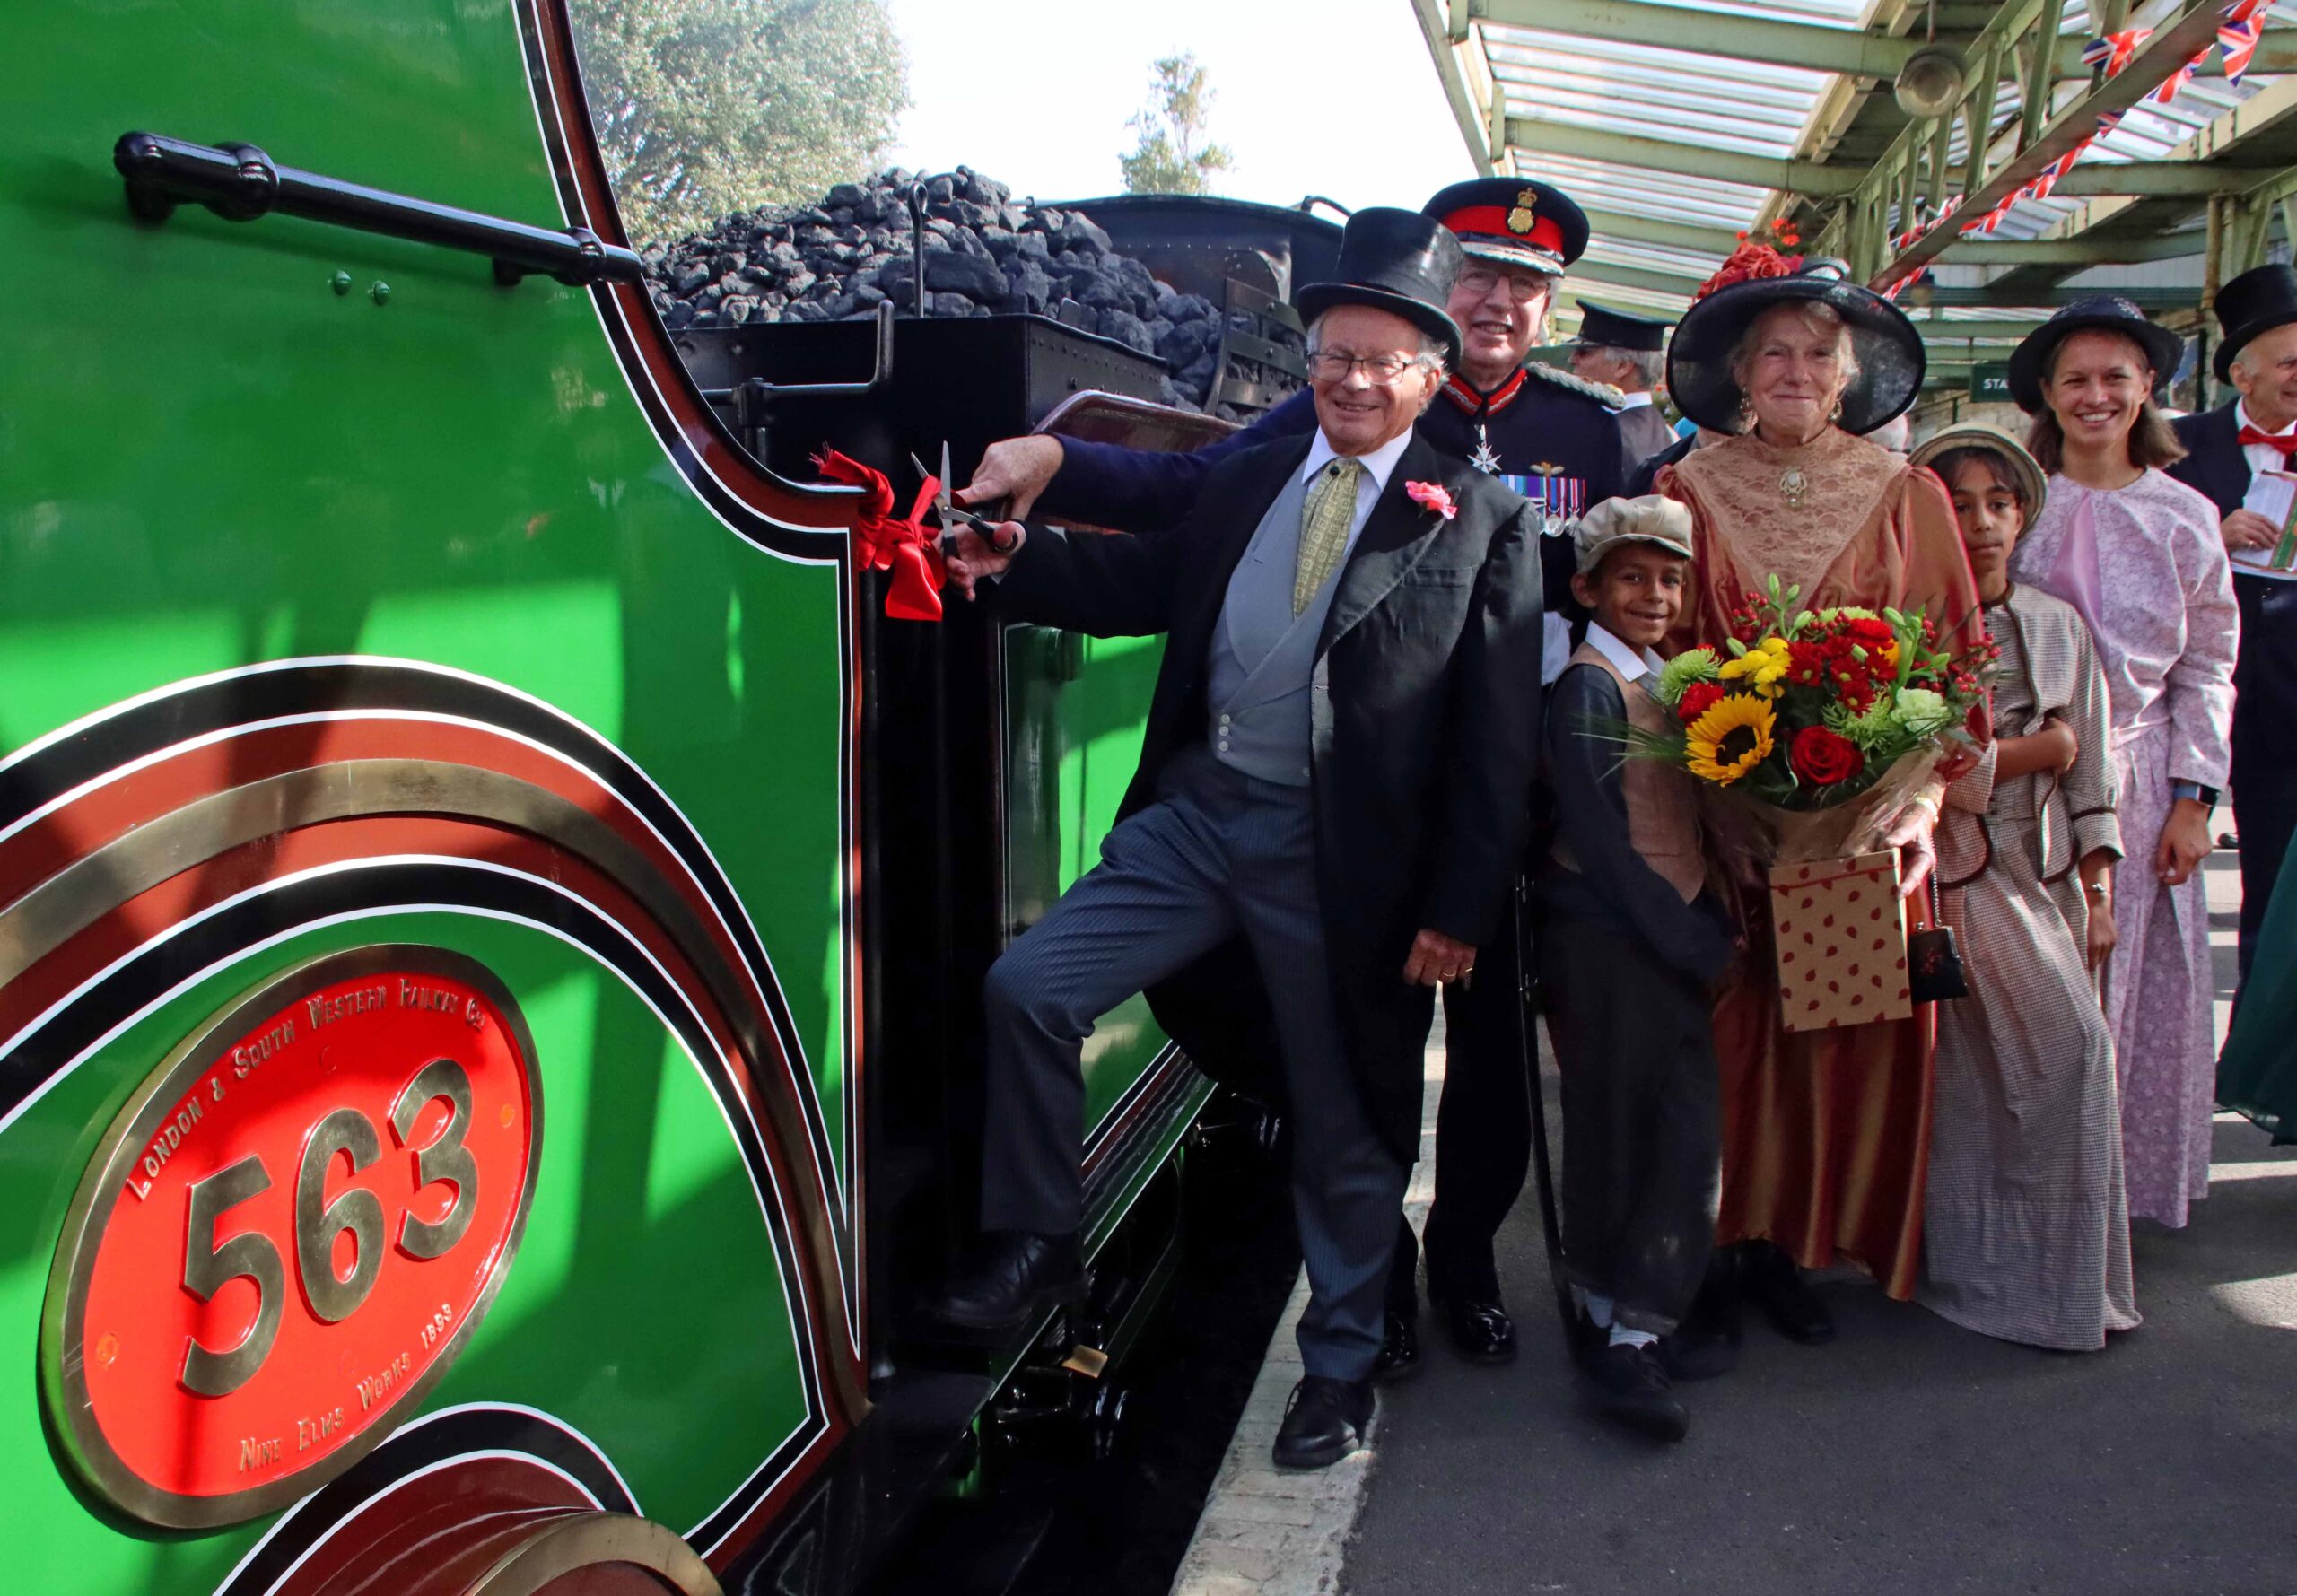 Swanage Railway Trust patron Sir Philip Williams and Lord Lieutenant Swanage Angus Campbell | Credit: Andre PM Wright